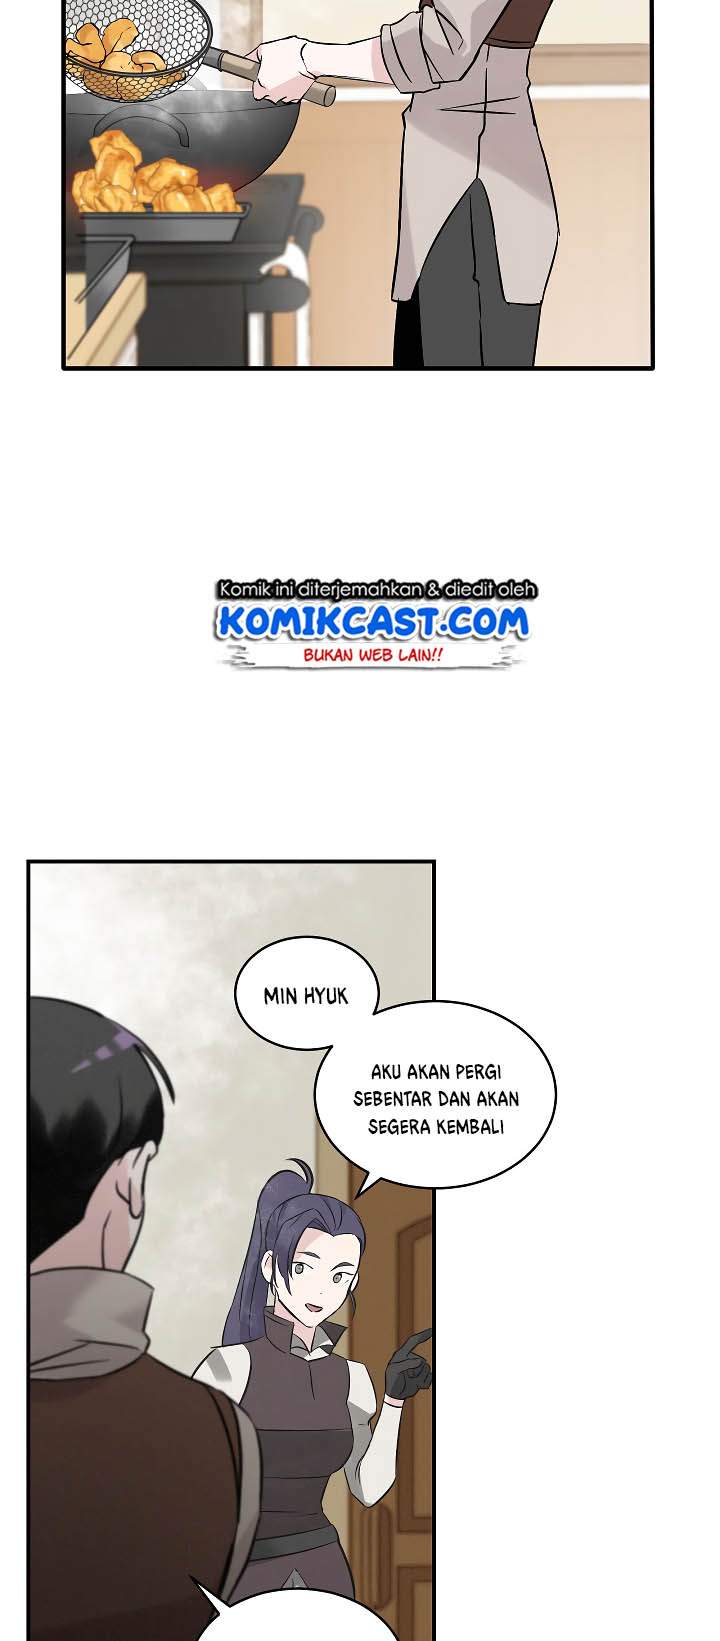 Leveling Up, By Only Eating! (Gourmet Gaming) Chapter 08 - 483